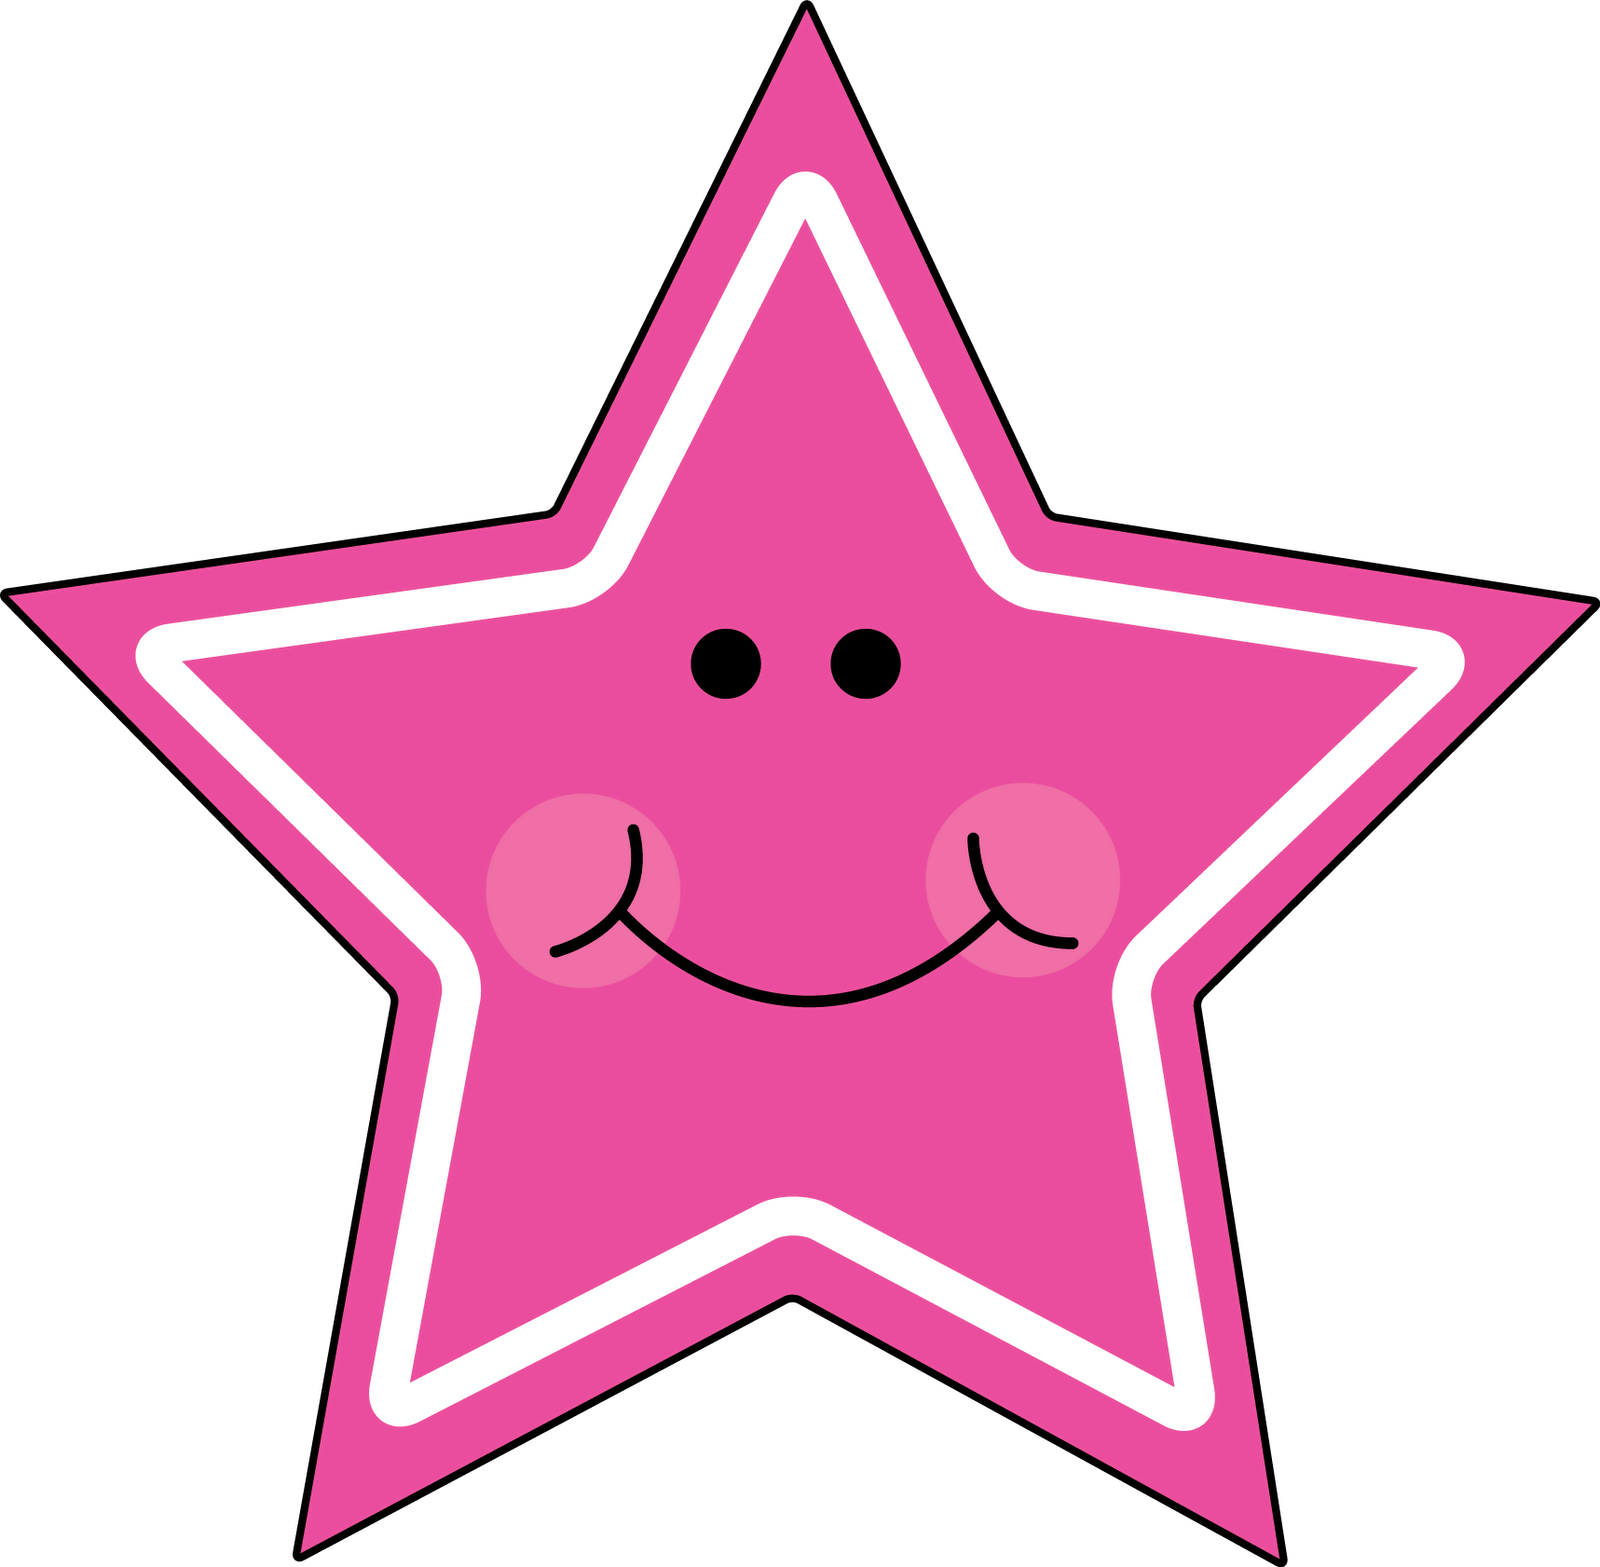 Picture Of A Star Shape